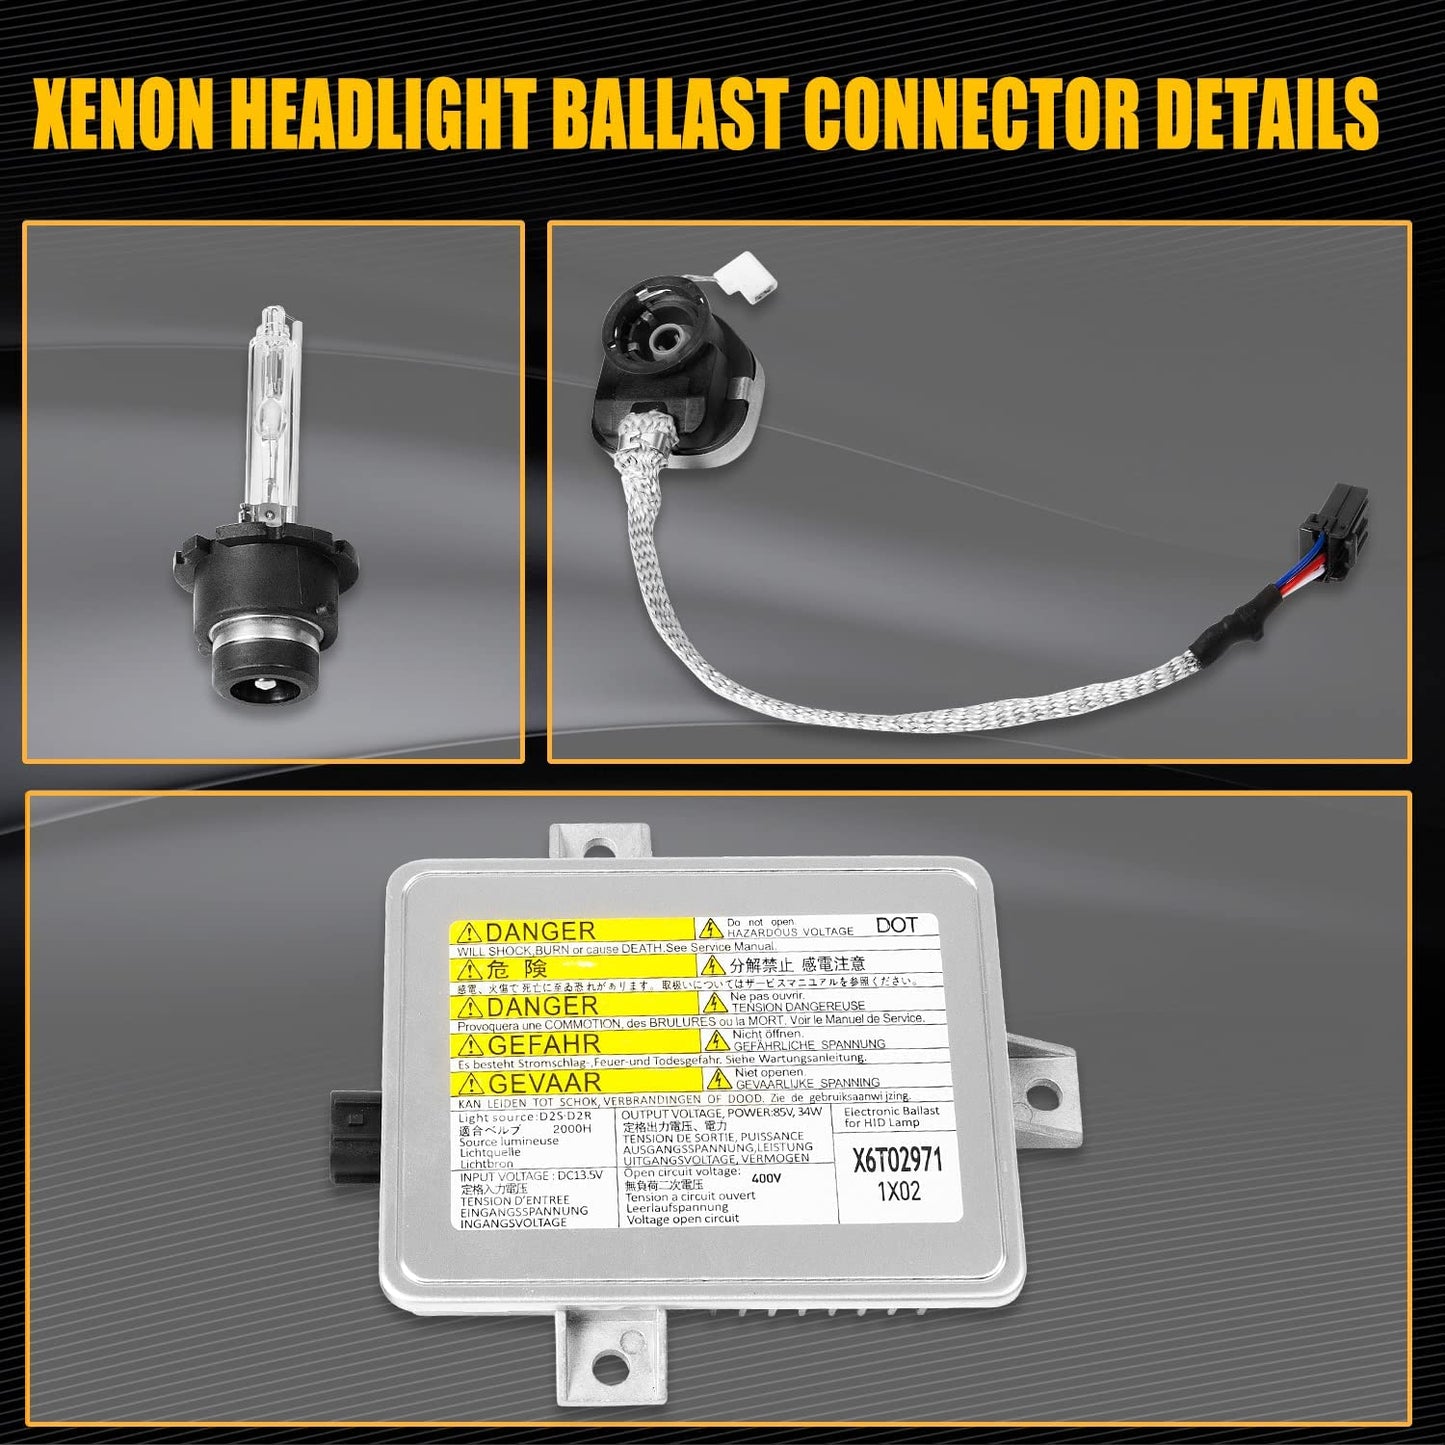 X6T02981 Xenon Ballast Unit Assembly Module with Igniter and D2S Bulb Compatible with Acura TL TSX and TL Type-S, Honda S2000, Mazda 3 Replaces W3T10471, W3T14371, X6T02971